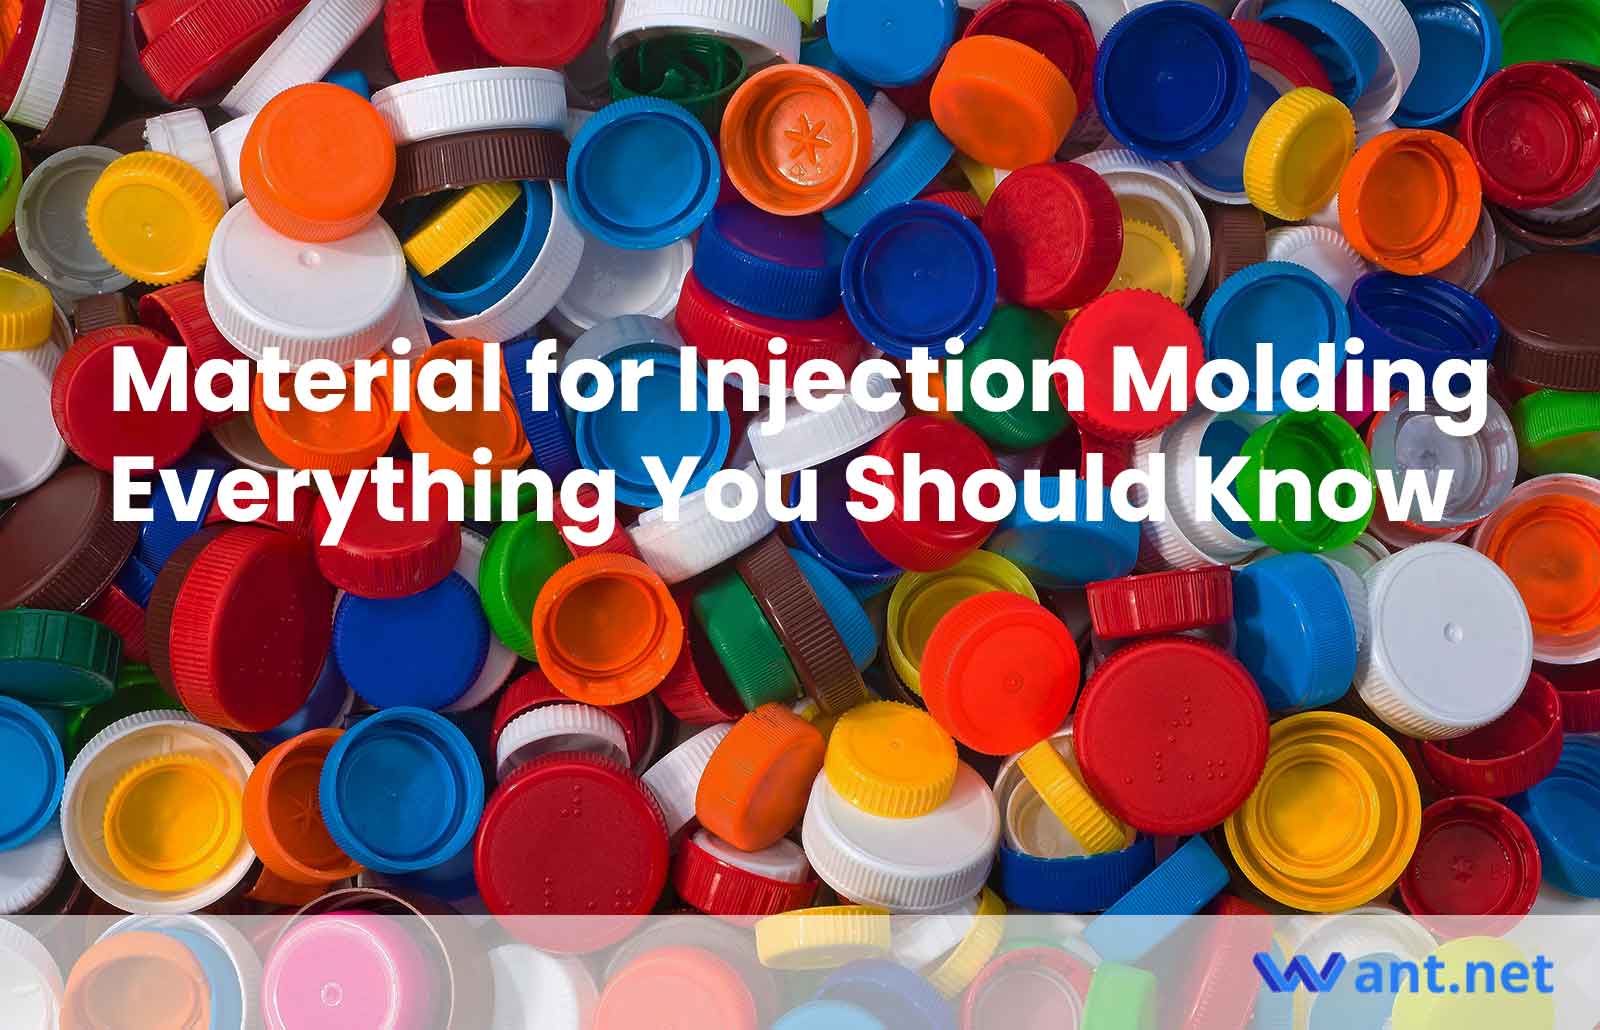 Material for Injection Molding